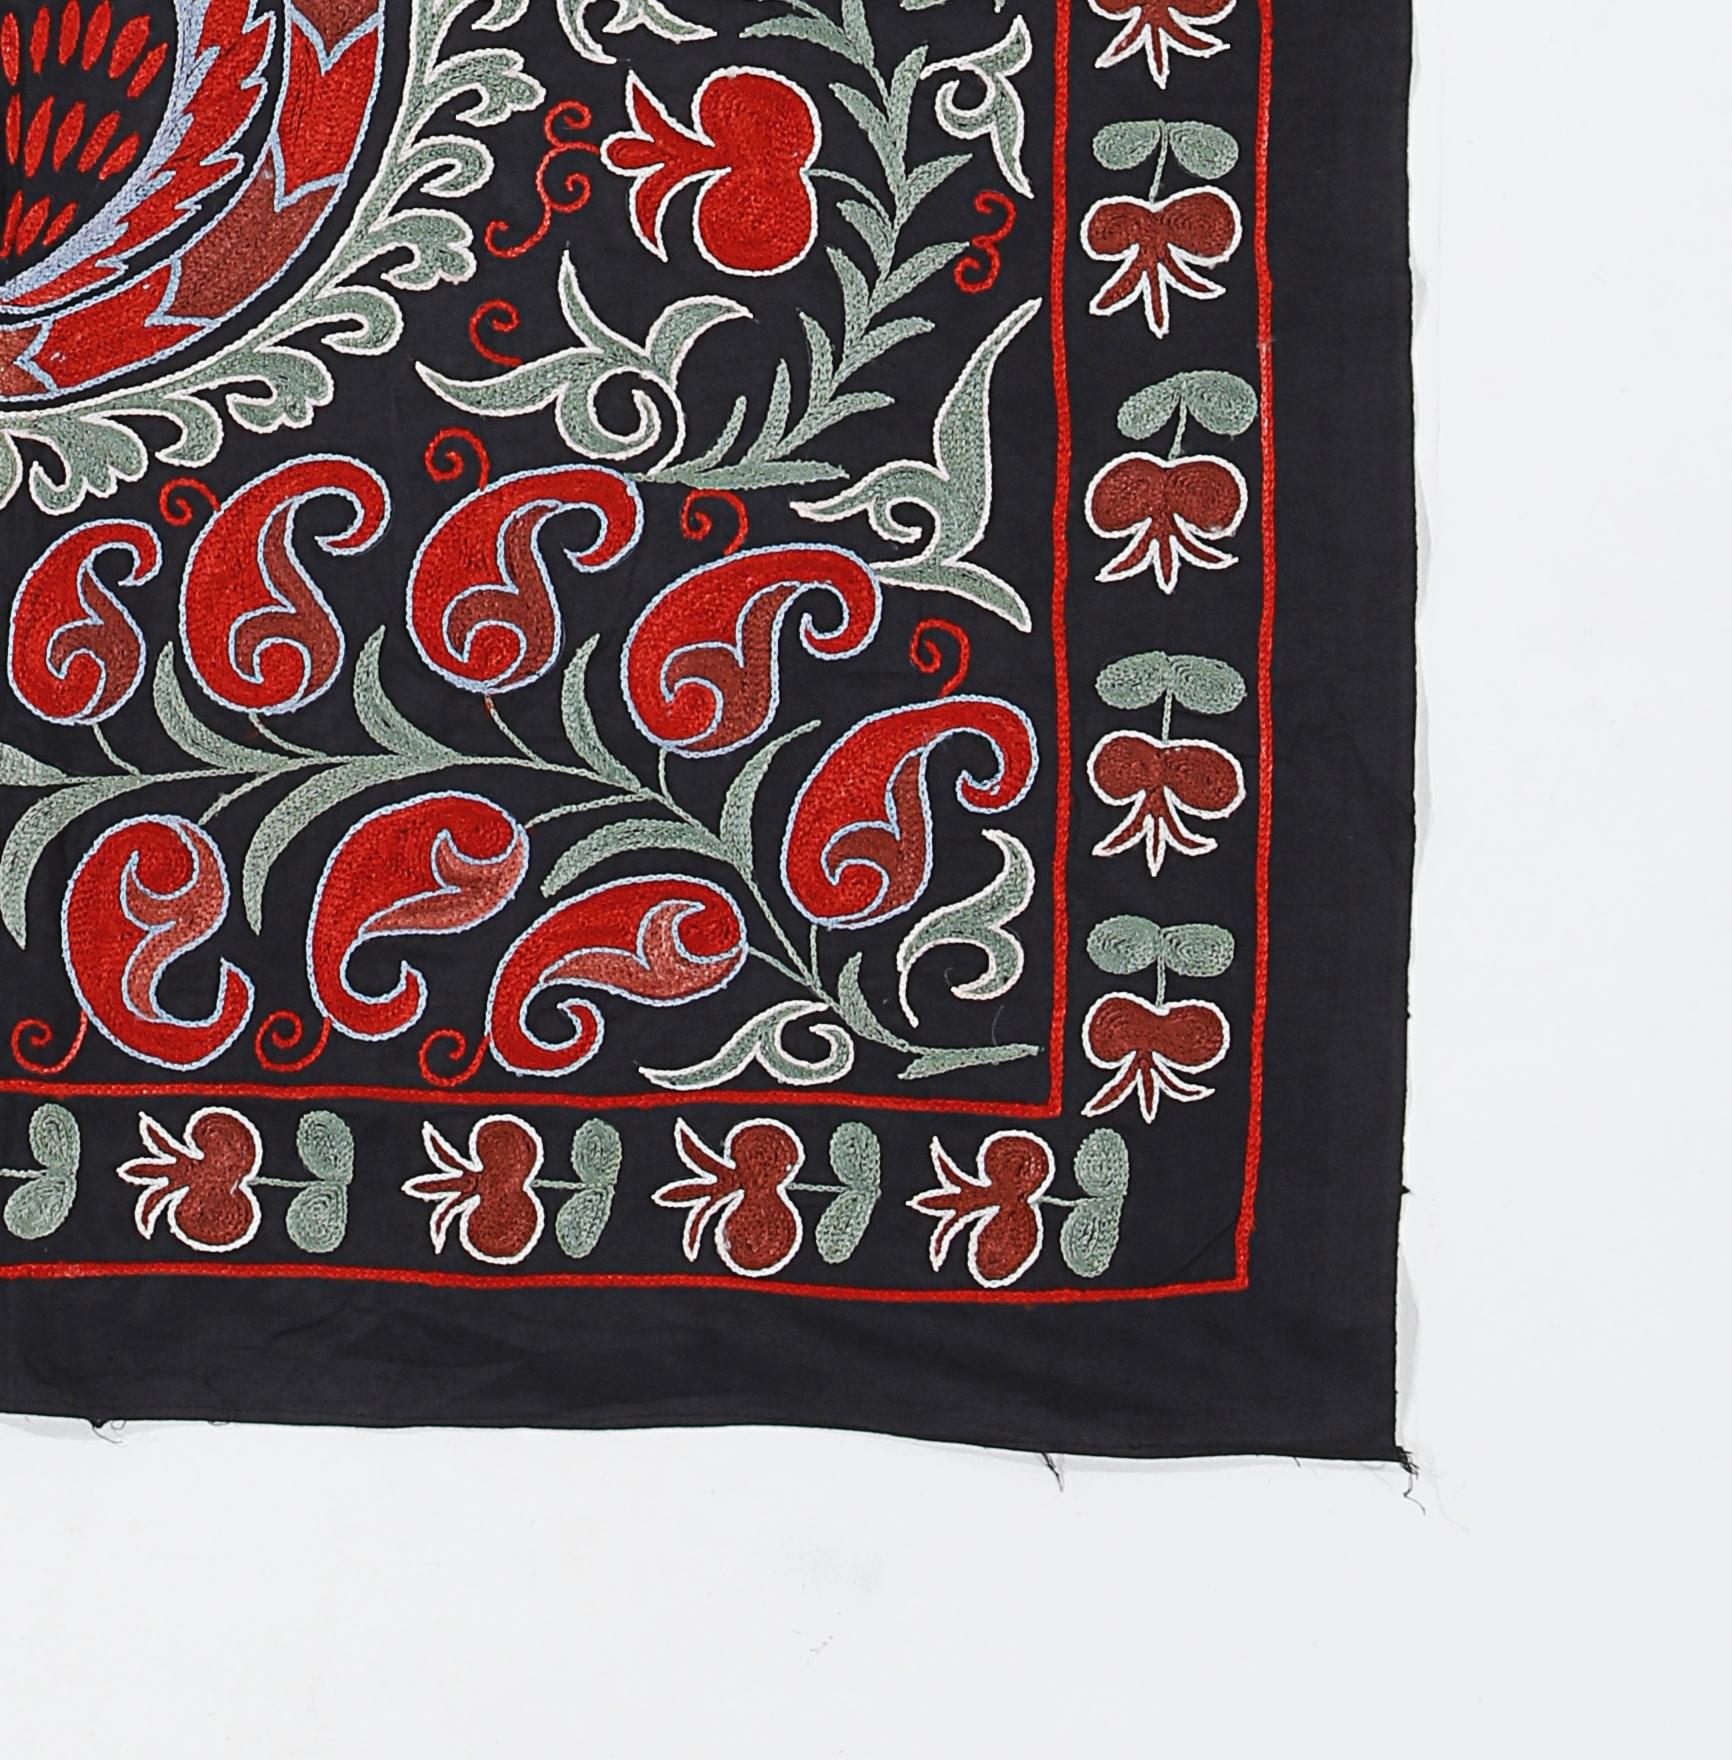 3'x3' Tashkent Embroidered Wall Hanging, Vintage Tablecloth in Black, Green, Red In Excellent Condition For Sale In Philadelphia, PA